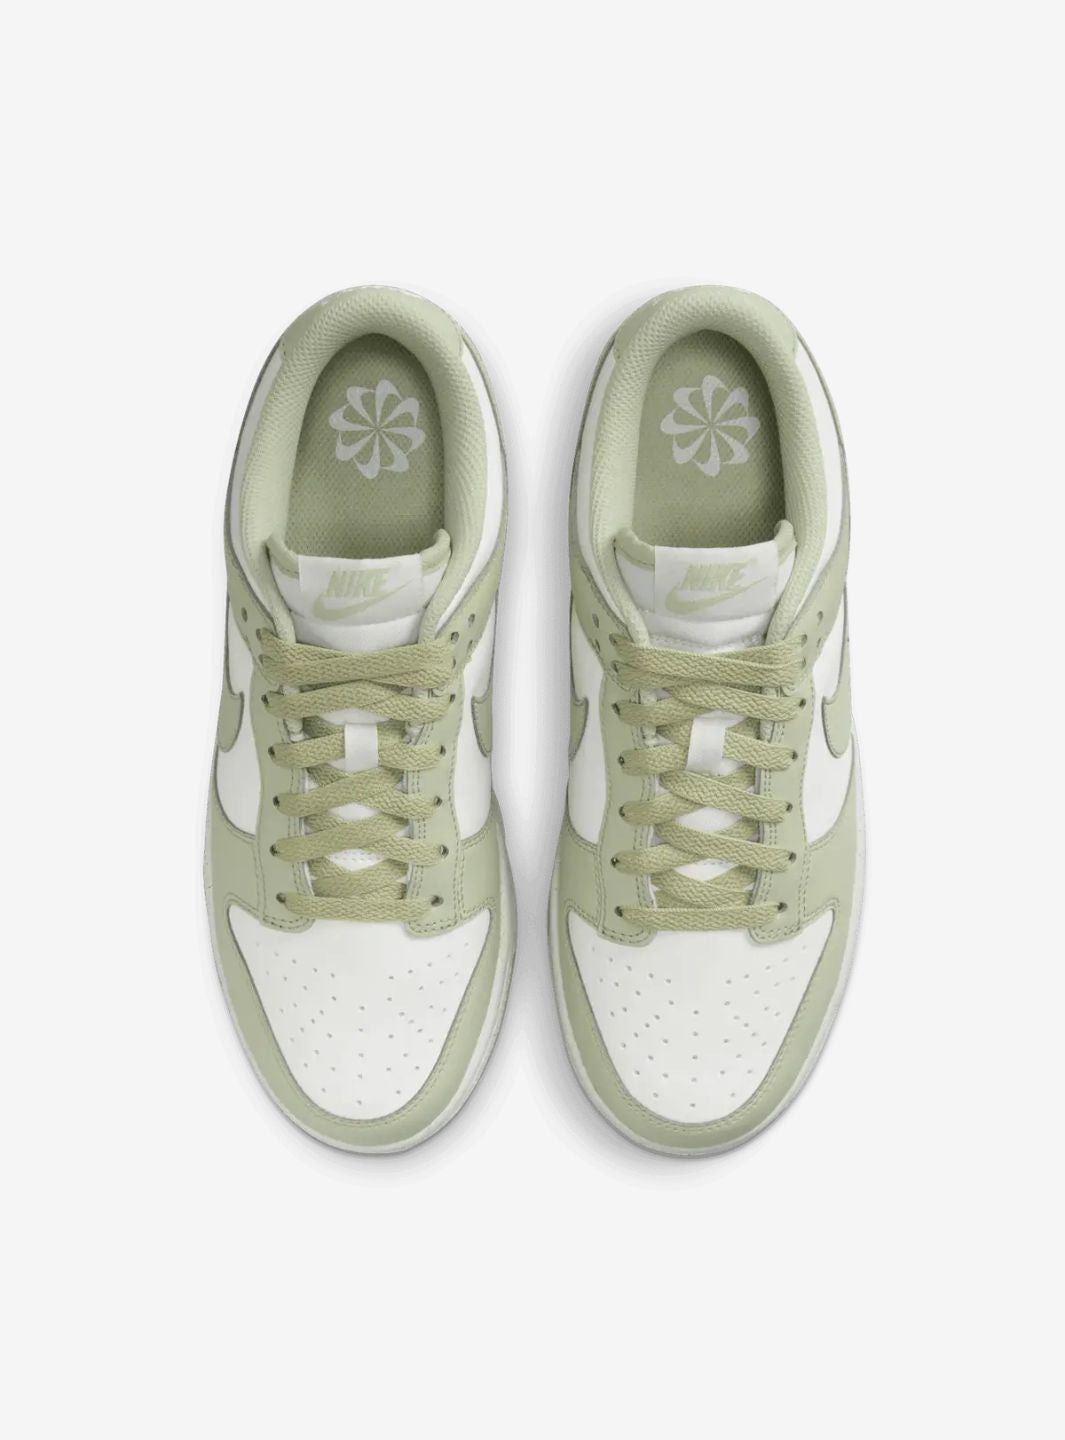 Nike Dunk Low Next Nature Olive Aura - HF5384-300 | ResellZone